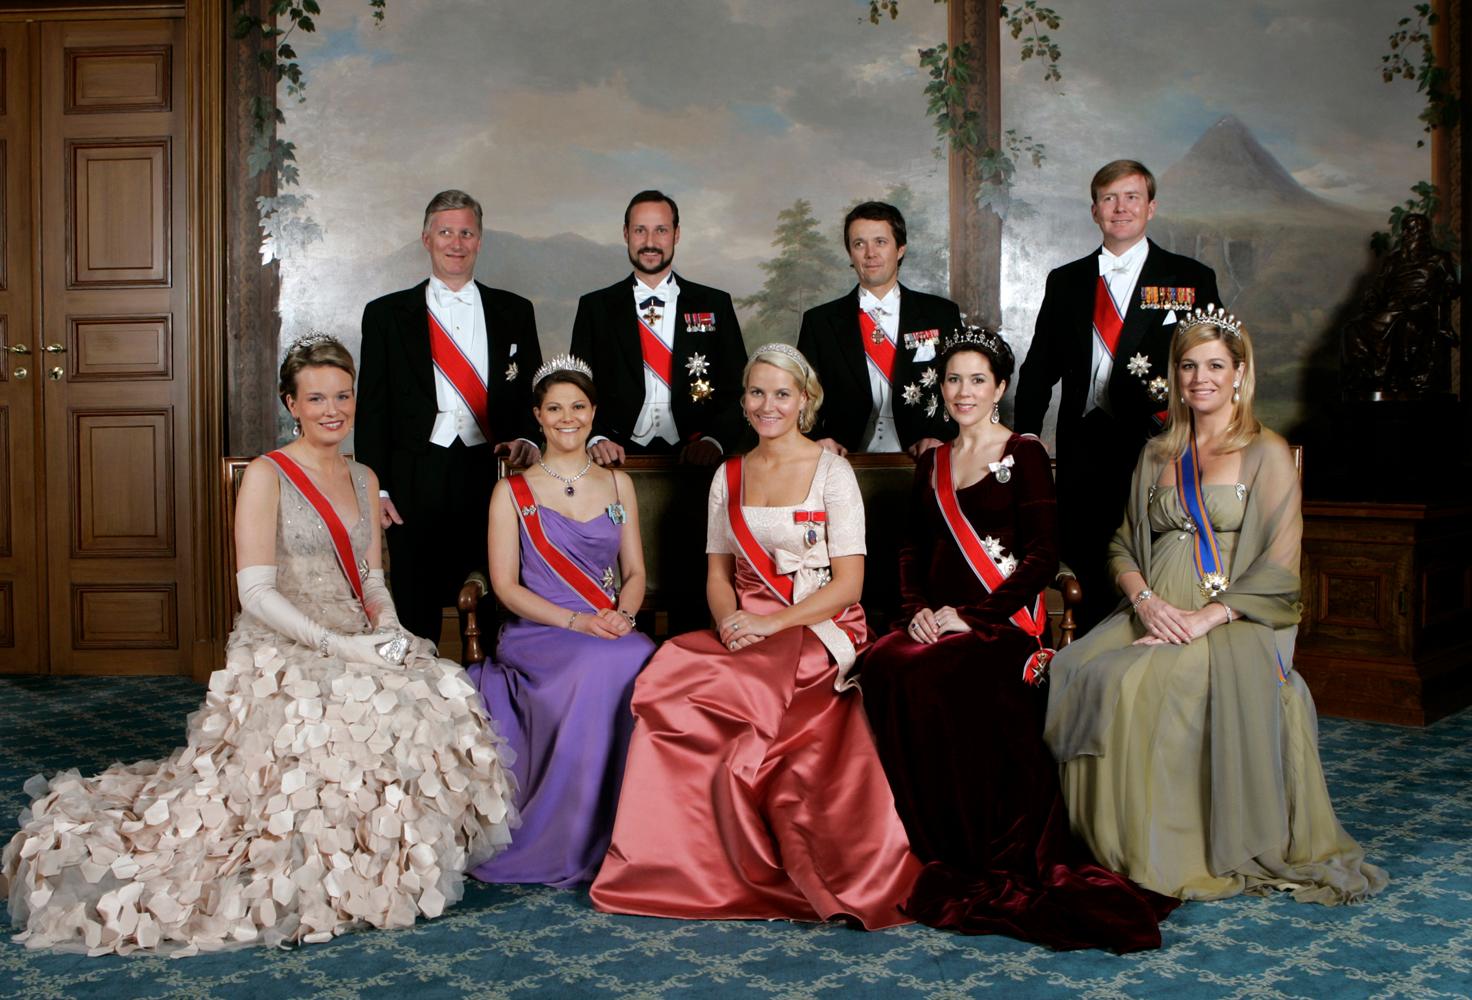 The Royal Order of Sartorial Splendor: Royal Event of the 